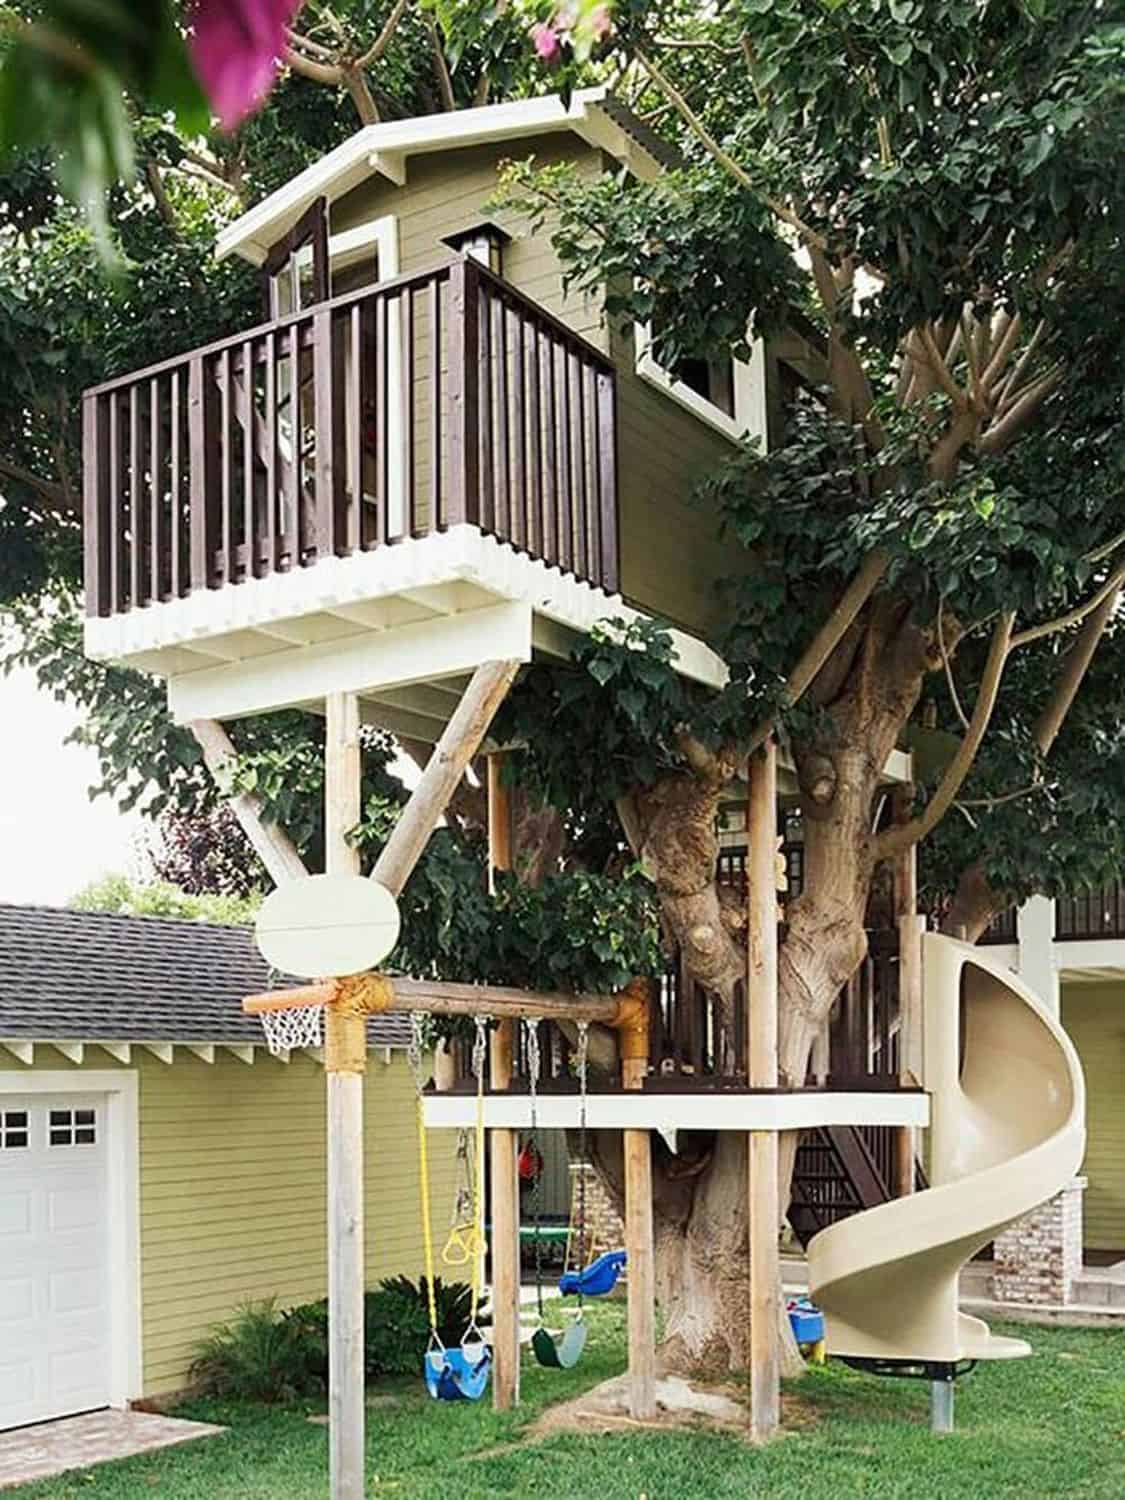 Treehouse for your cute little jungle experience